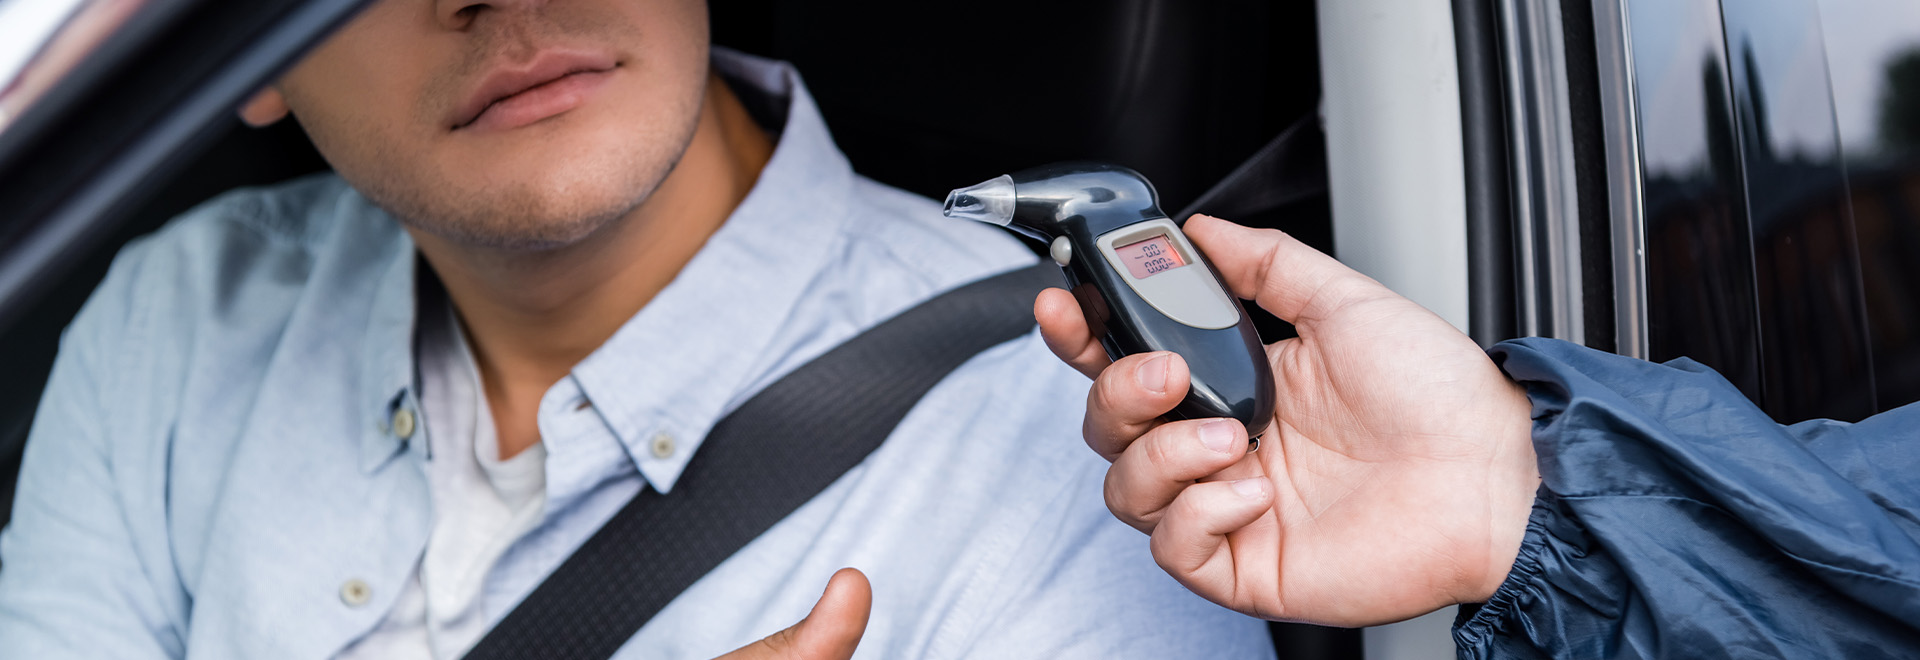 cropped view of driver taking breathalyzer from policeman while sitting in car